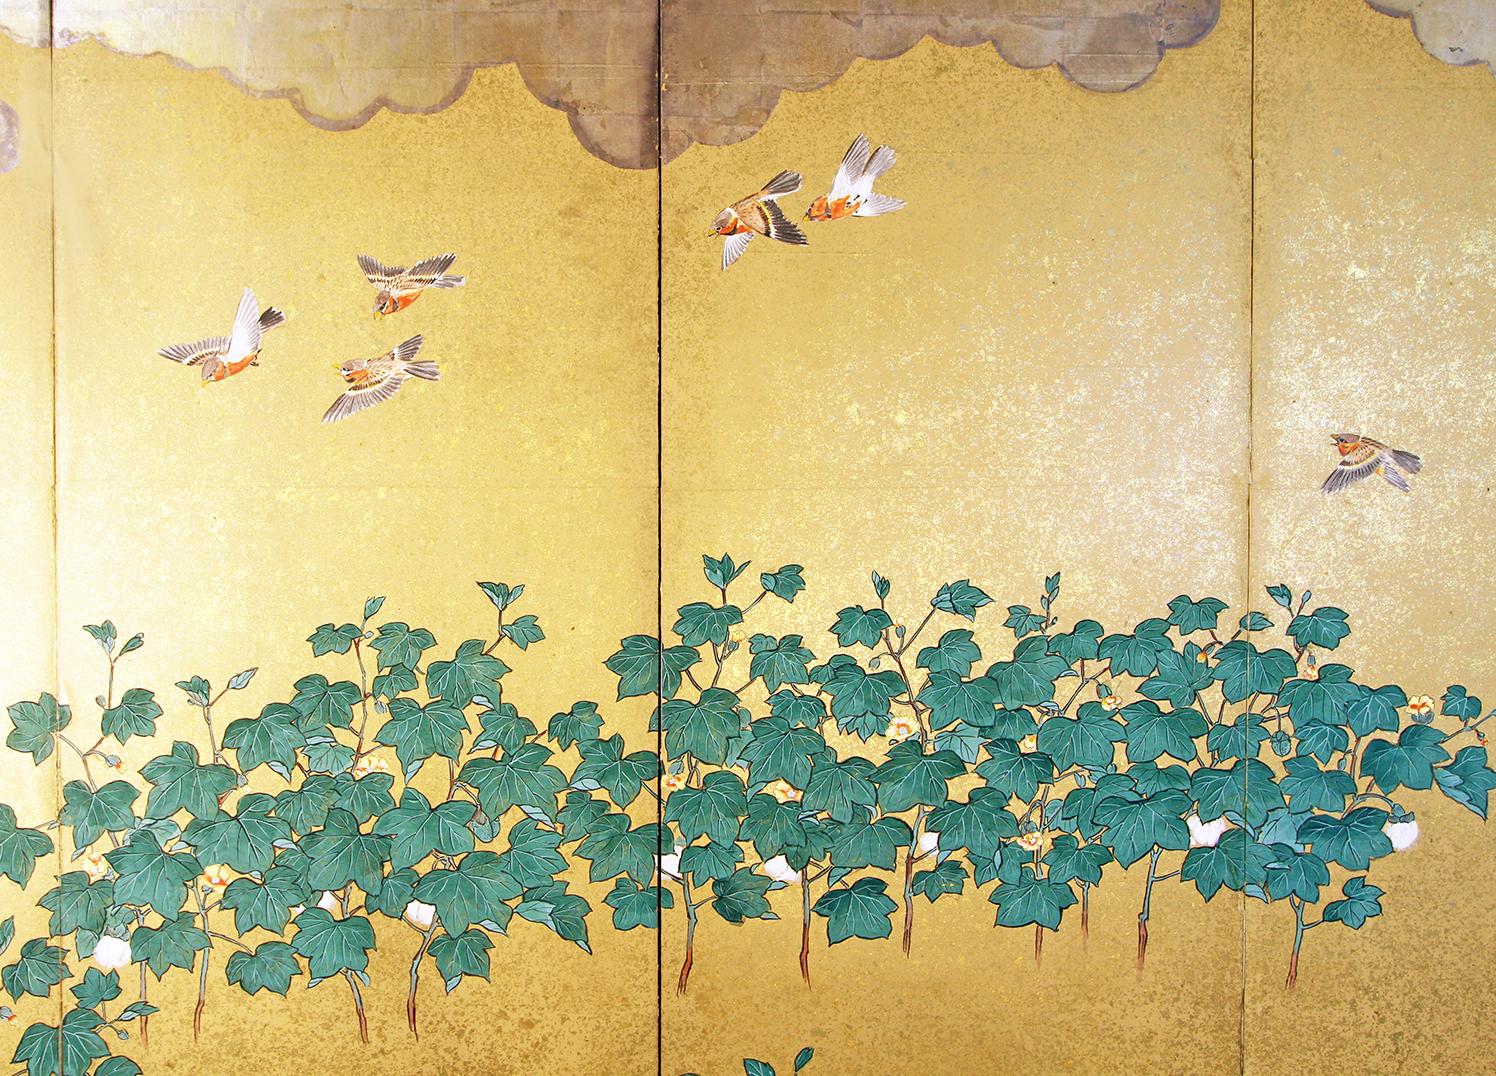 A luminous screen, a four-panel Japanese spring parade, painted with mineral pigments on vegetable paper and silver leaf, with freshly blossomed peony plants and robins in flight.
The silver leaf creates clouds from which the underlying scenes